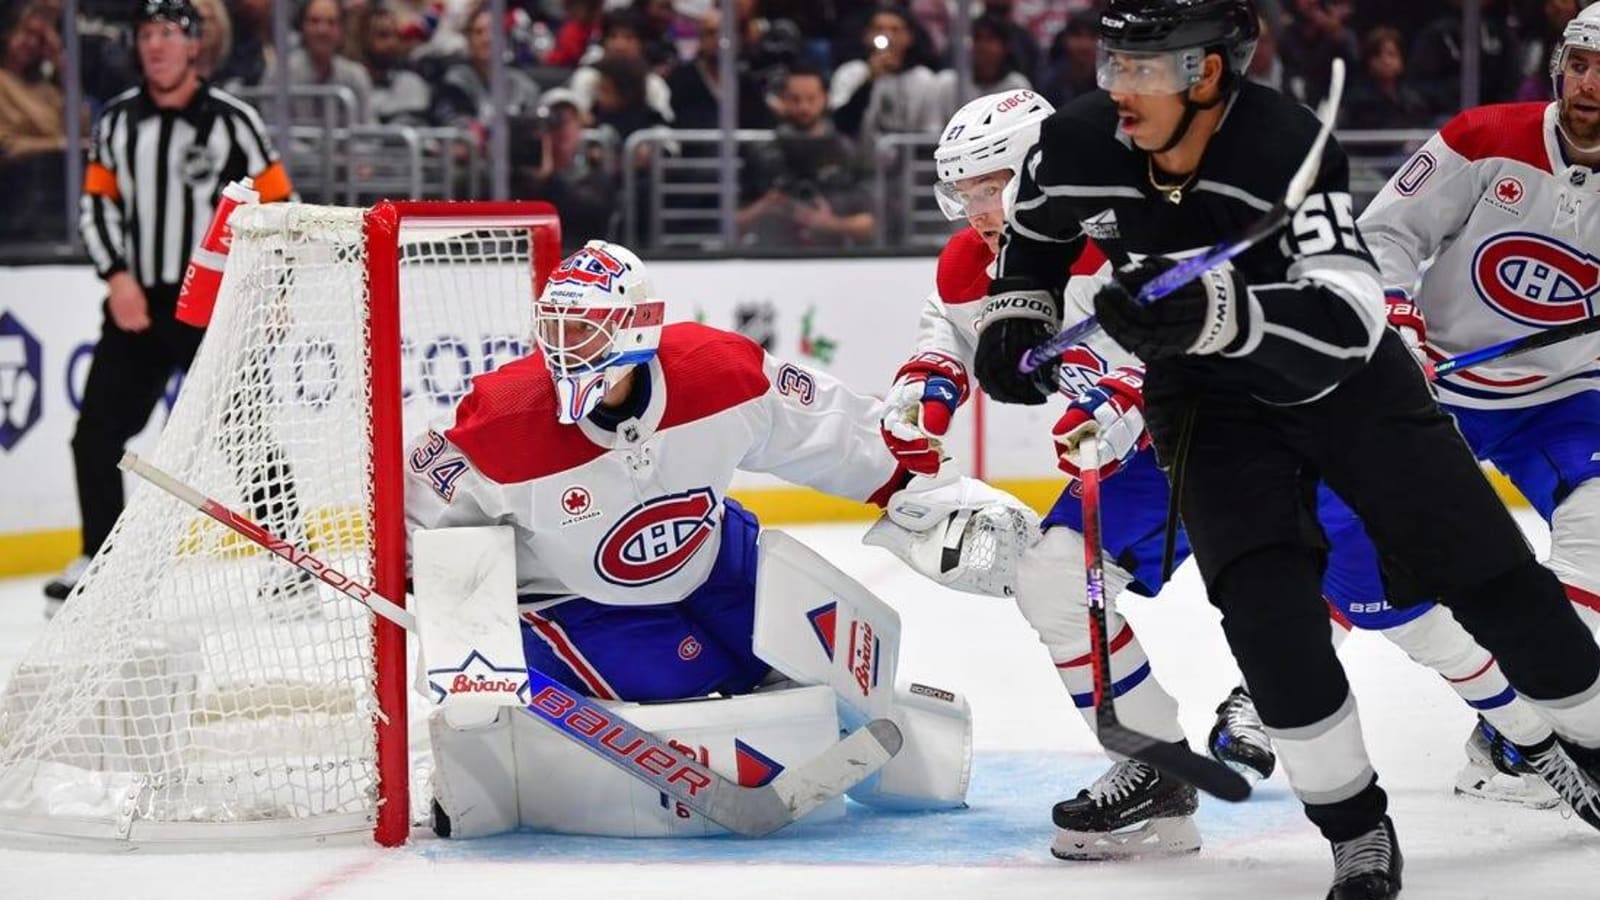 Kings roll 4-0 to continue success vs. Canadiens